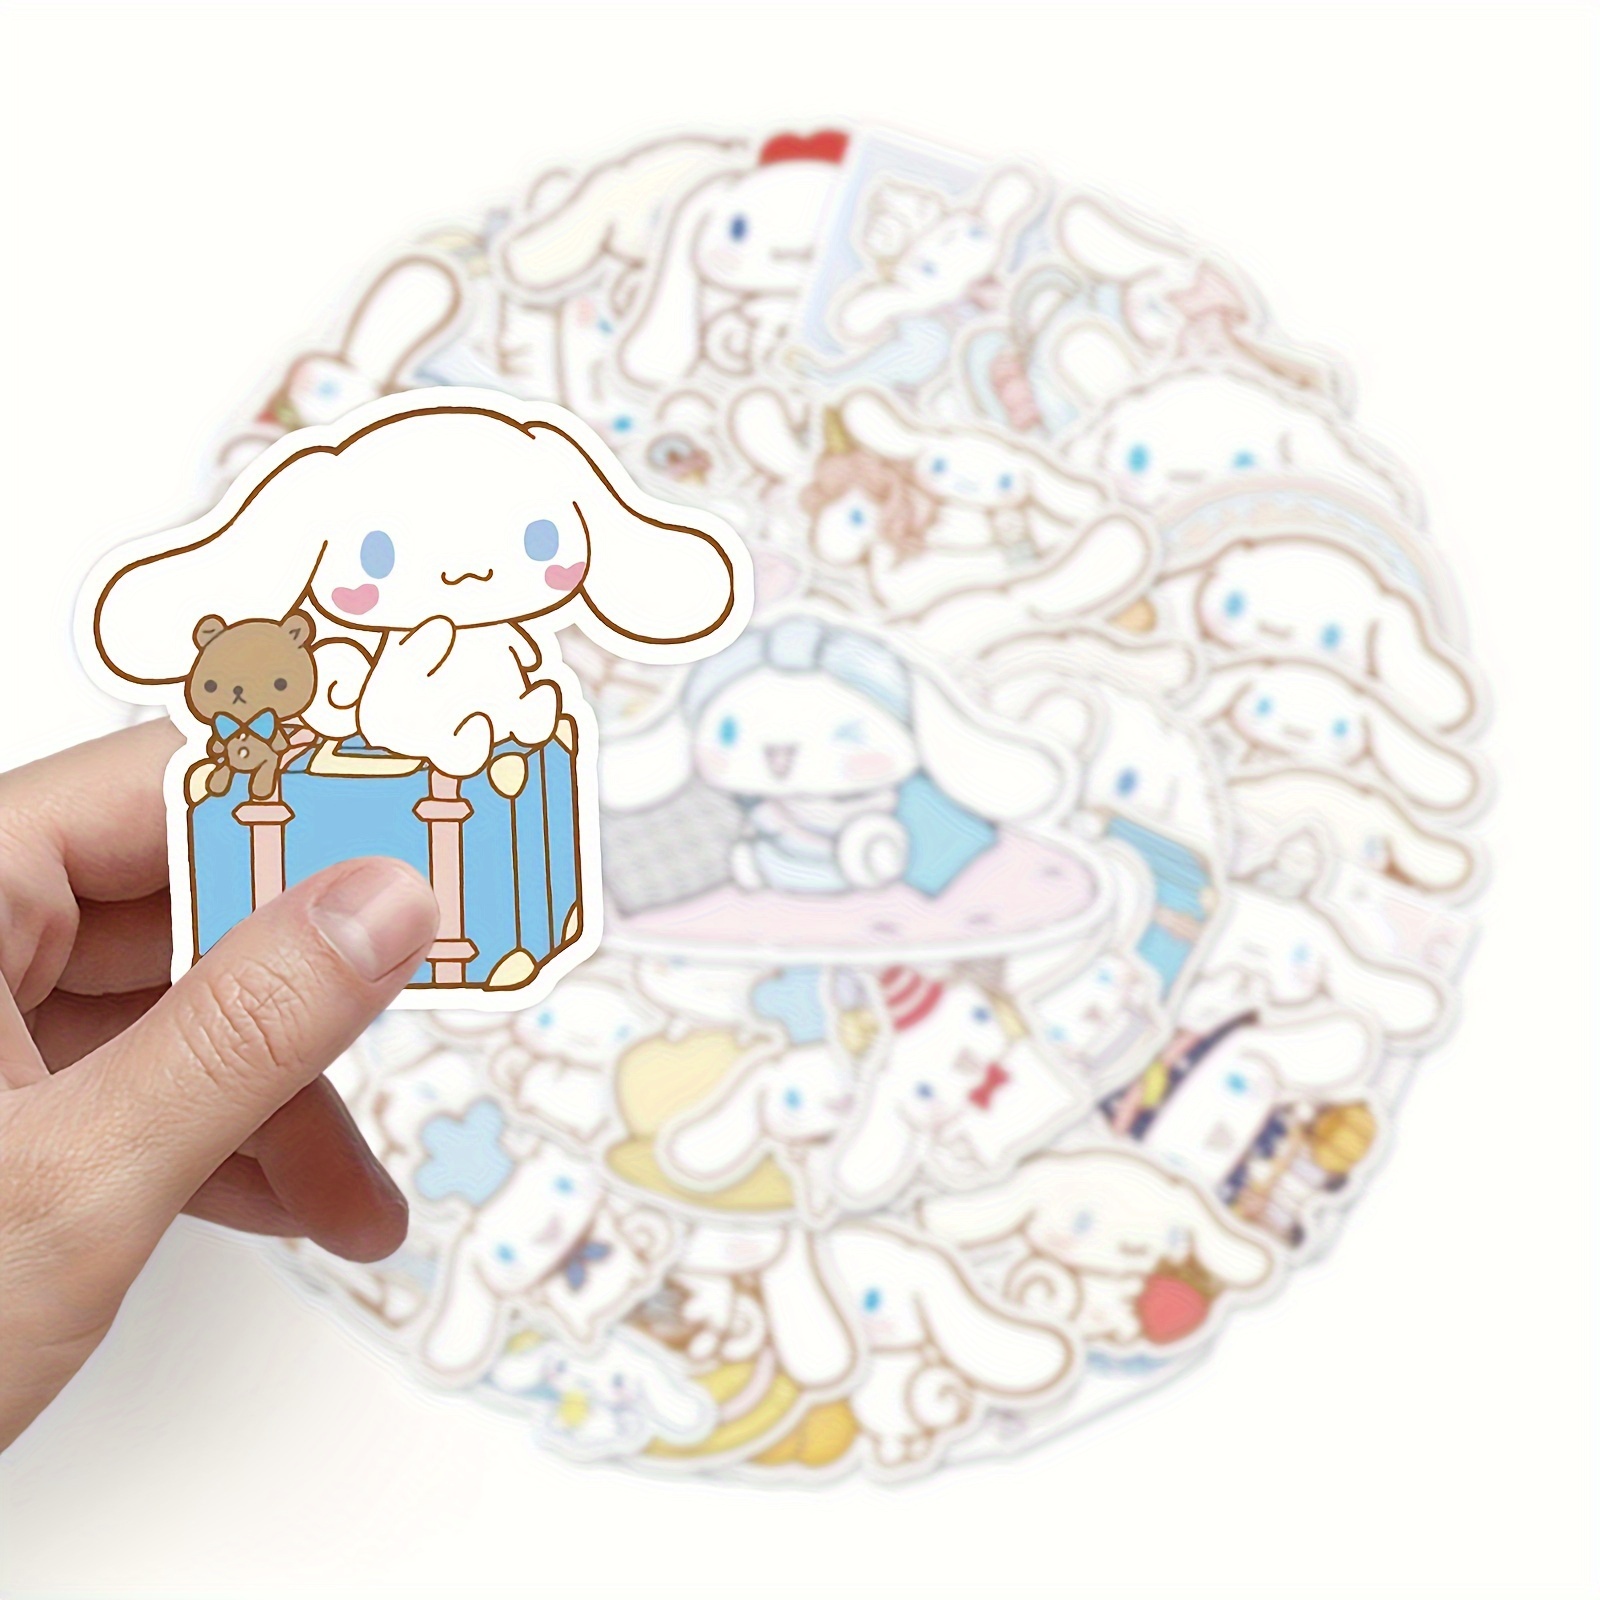 

Sanrio Cinnamoroll Stickers Cartoon Cute Image Waterproof Diy Decorative Stickers For Party Supplies, Party Favors, Birthdays, Gift For Christmas Halloween Gift